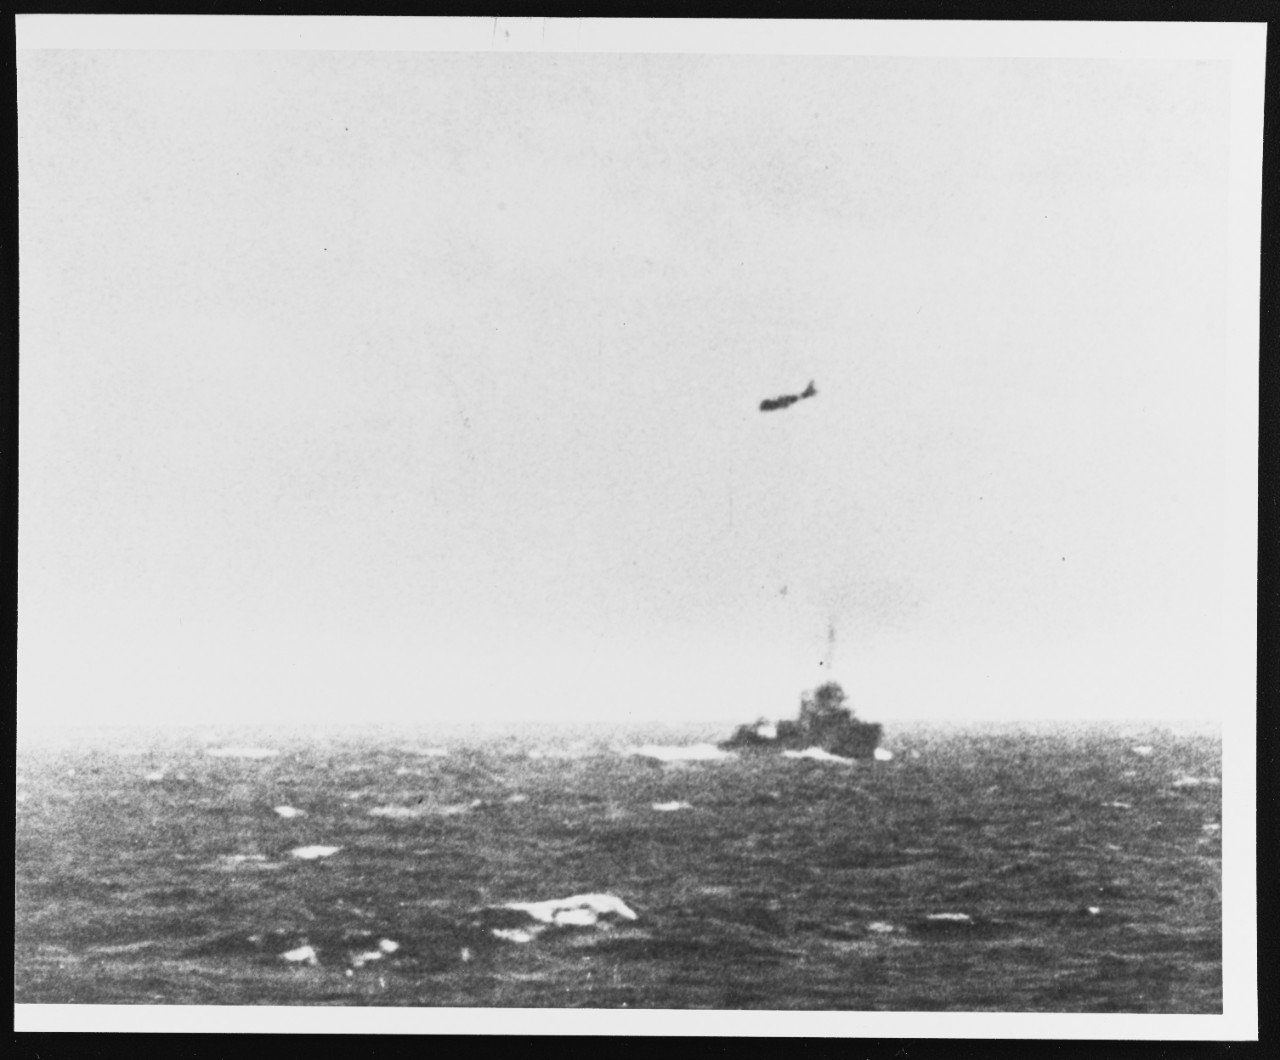 Battle of the Coral Sea, 8 May 1942